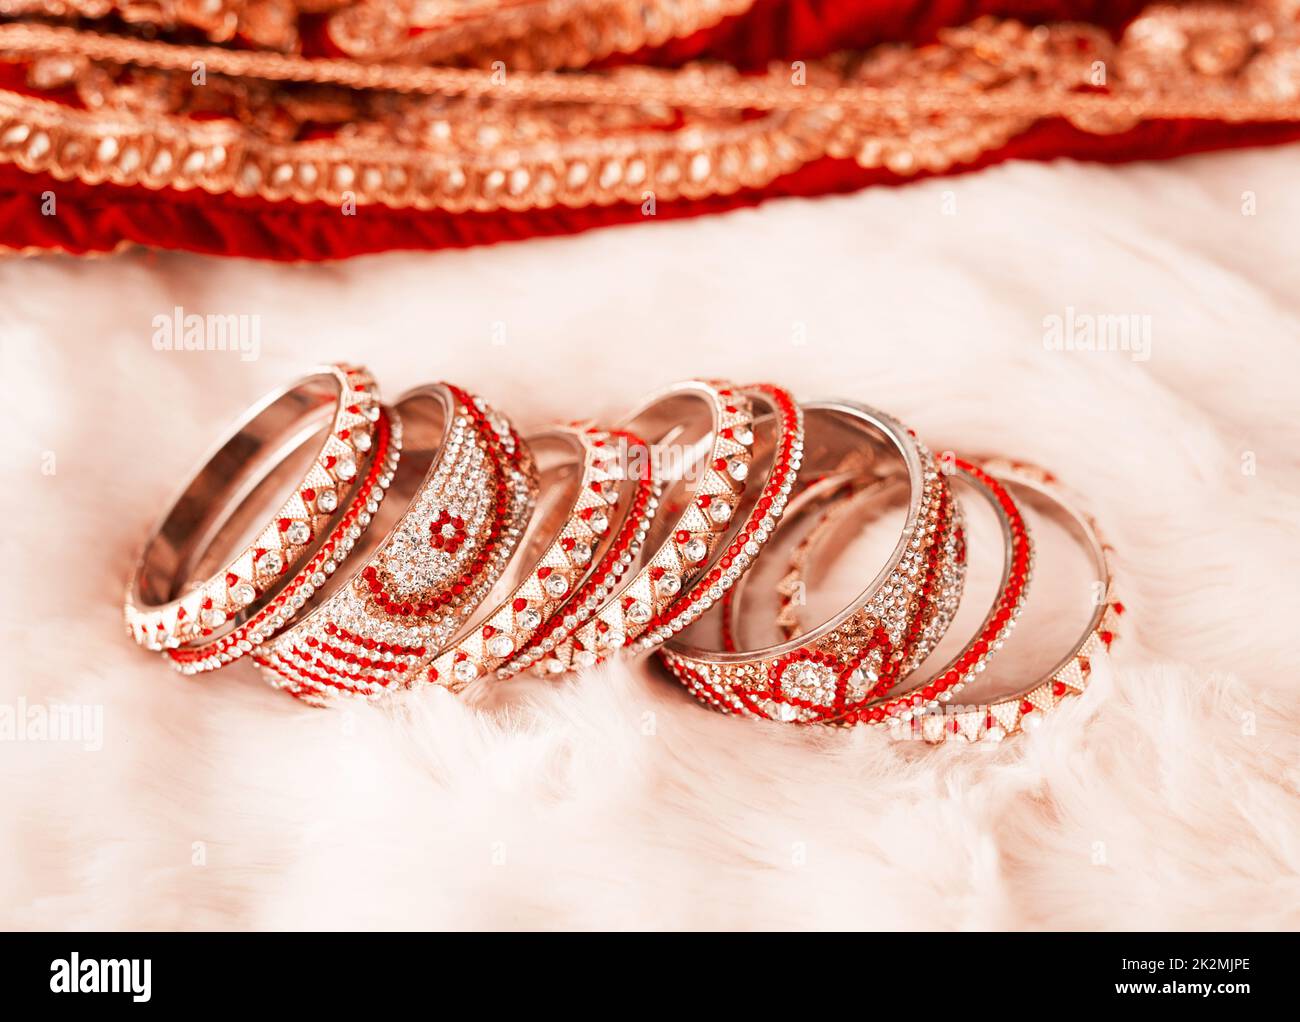 Glam up your look with these. Shot of beautiful bangles for a bride to wear at a traditional wedding. Stock Photo